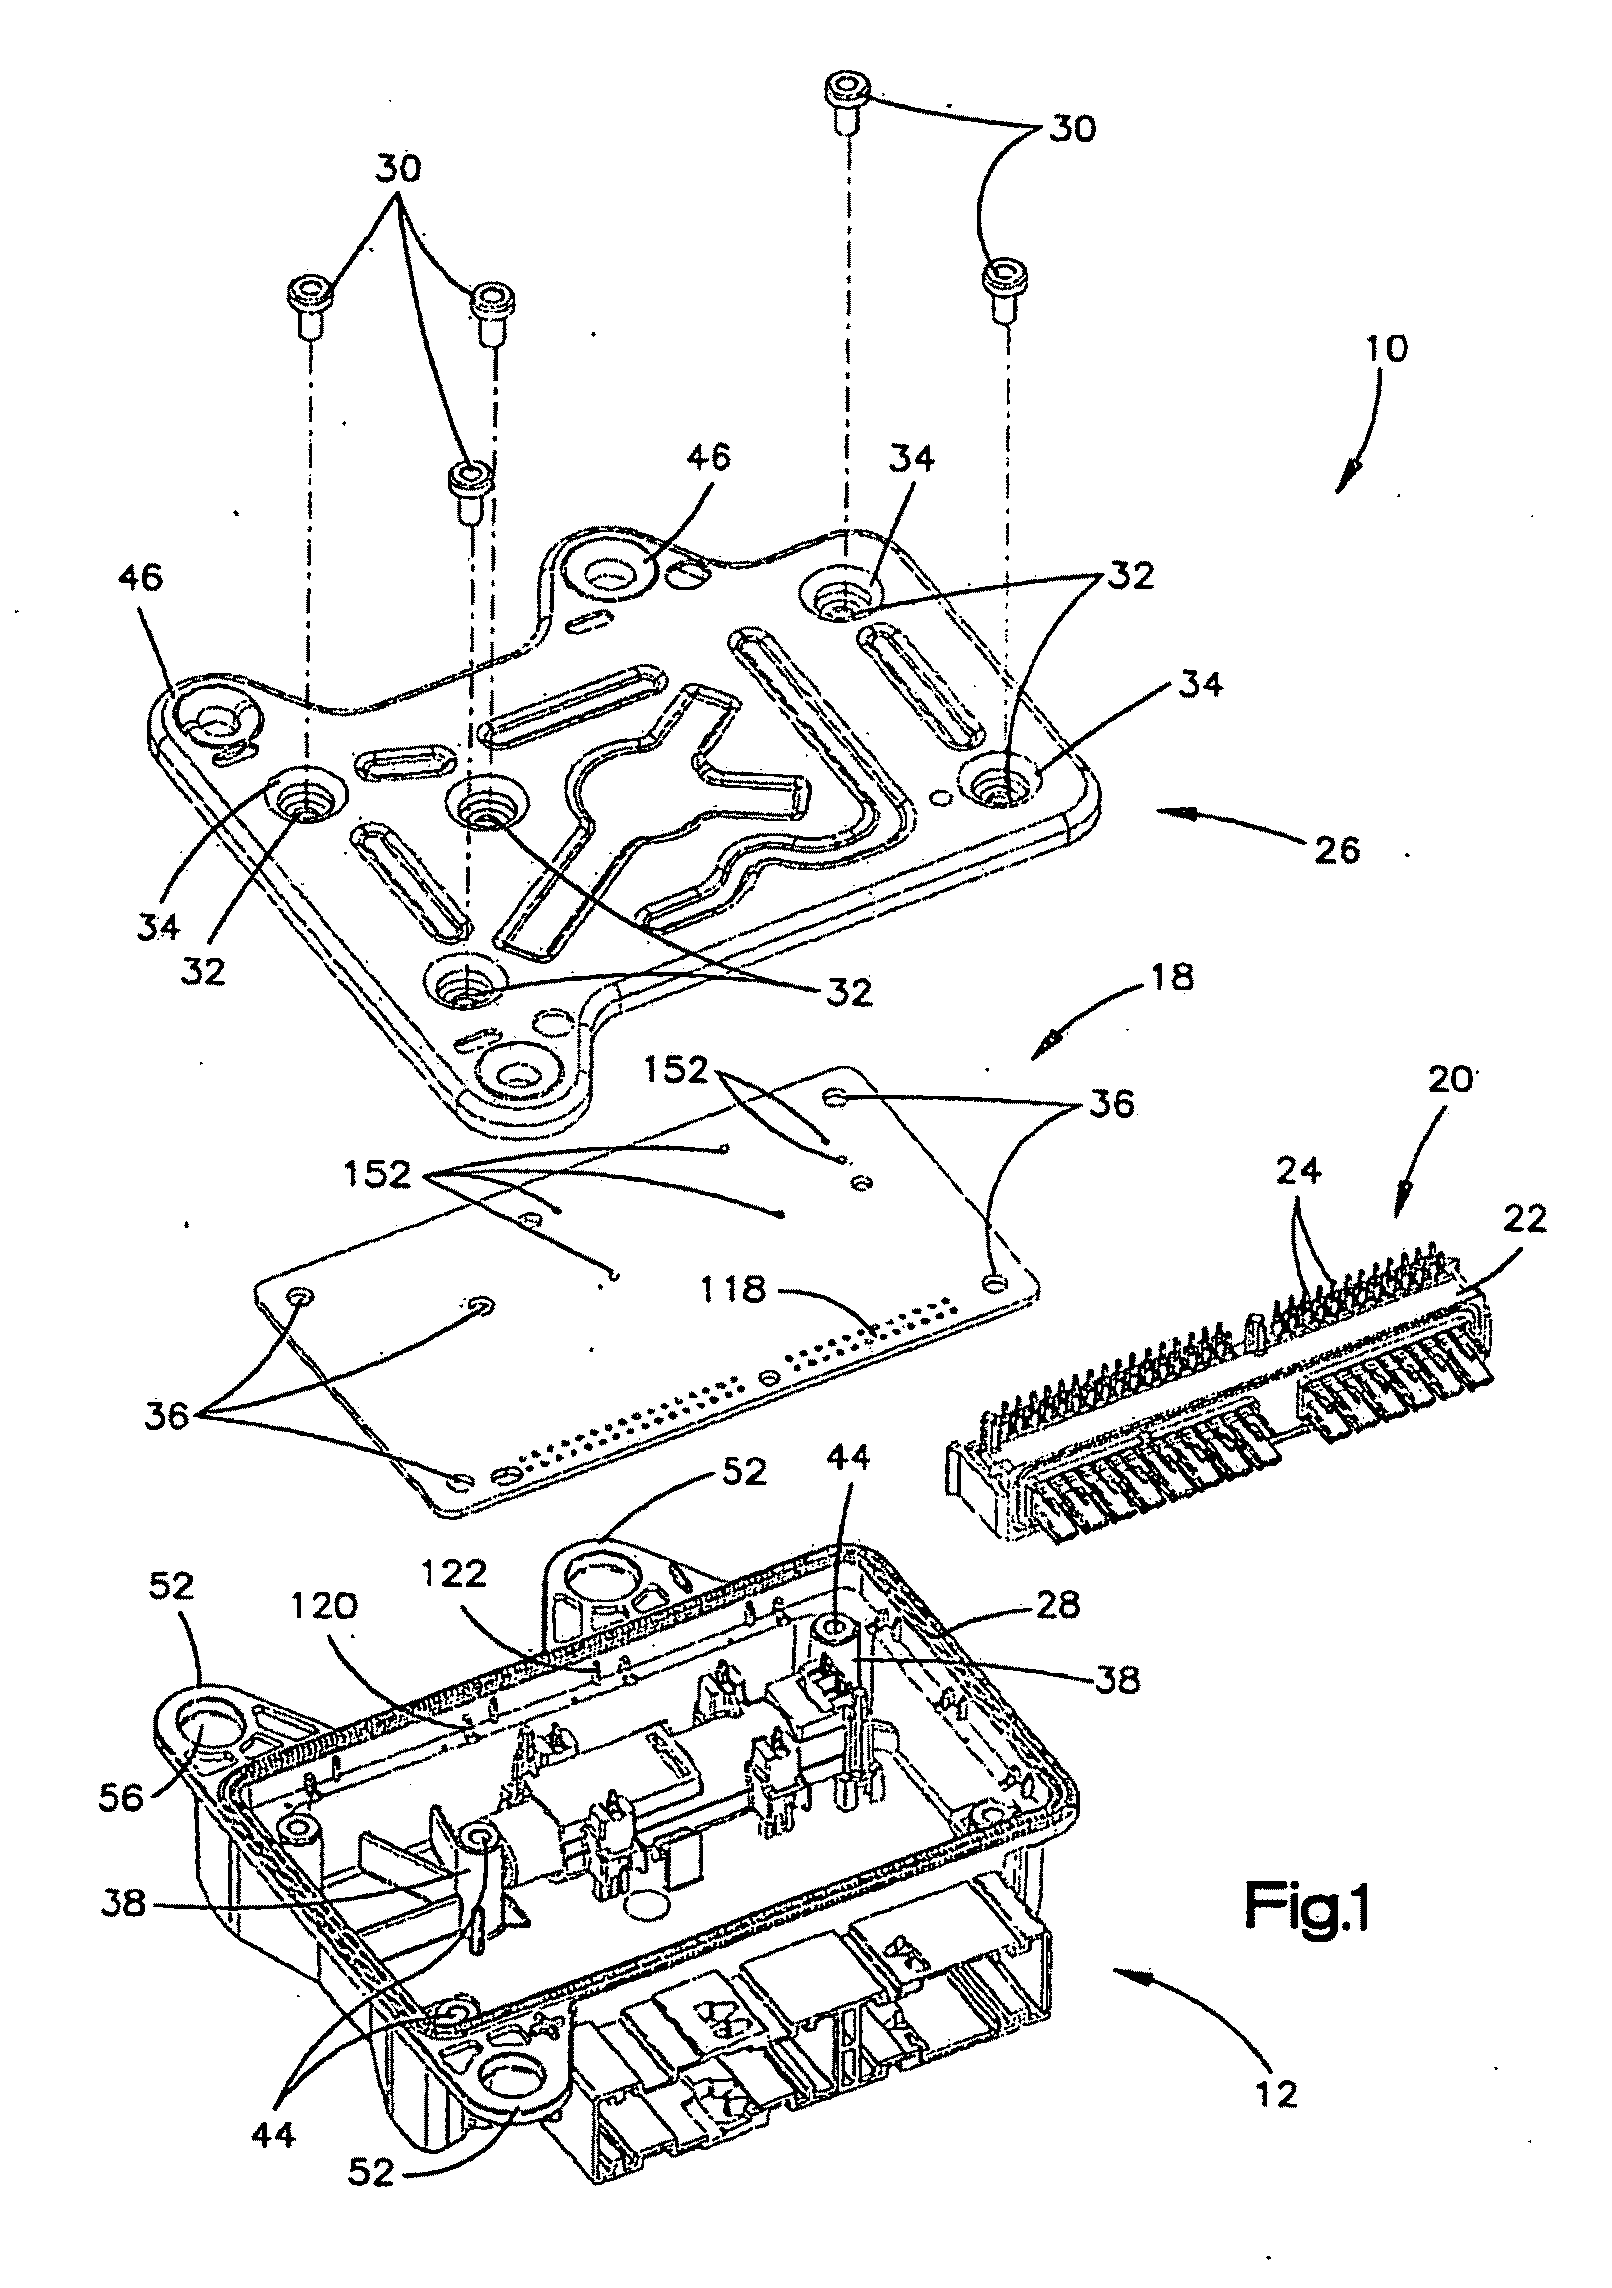 Electronic assembly and method of manufacturing same